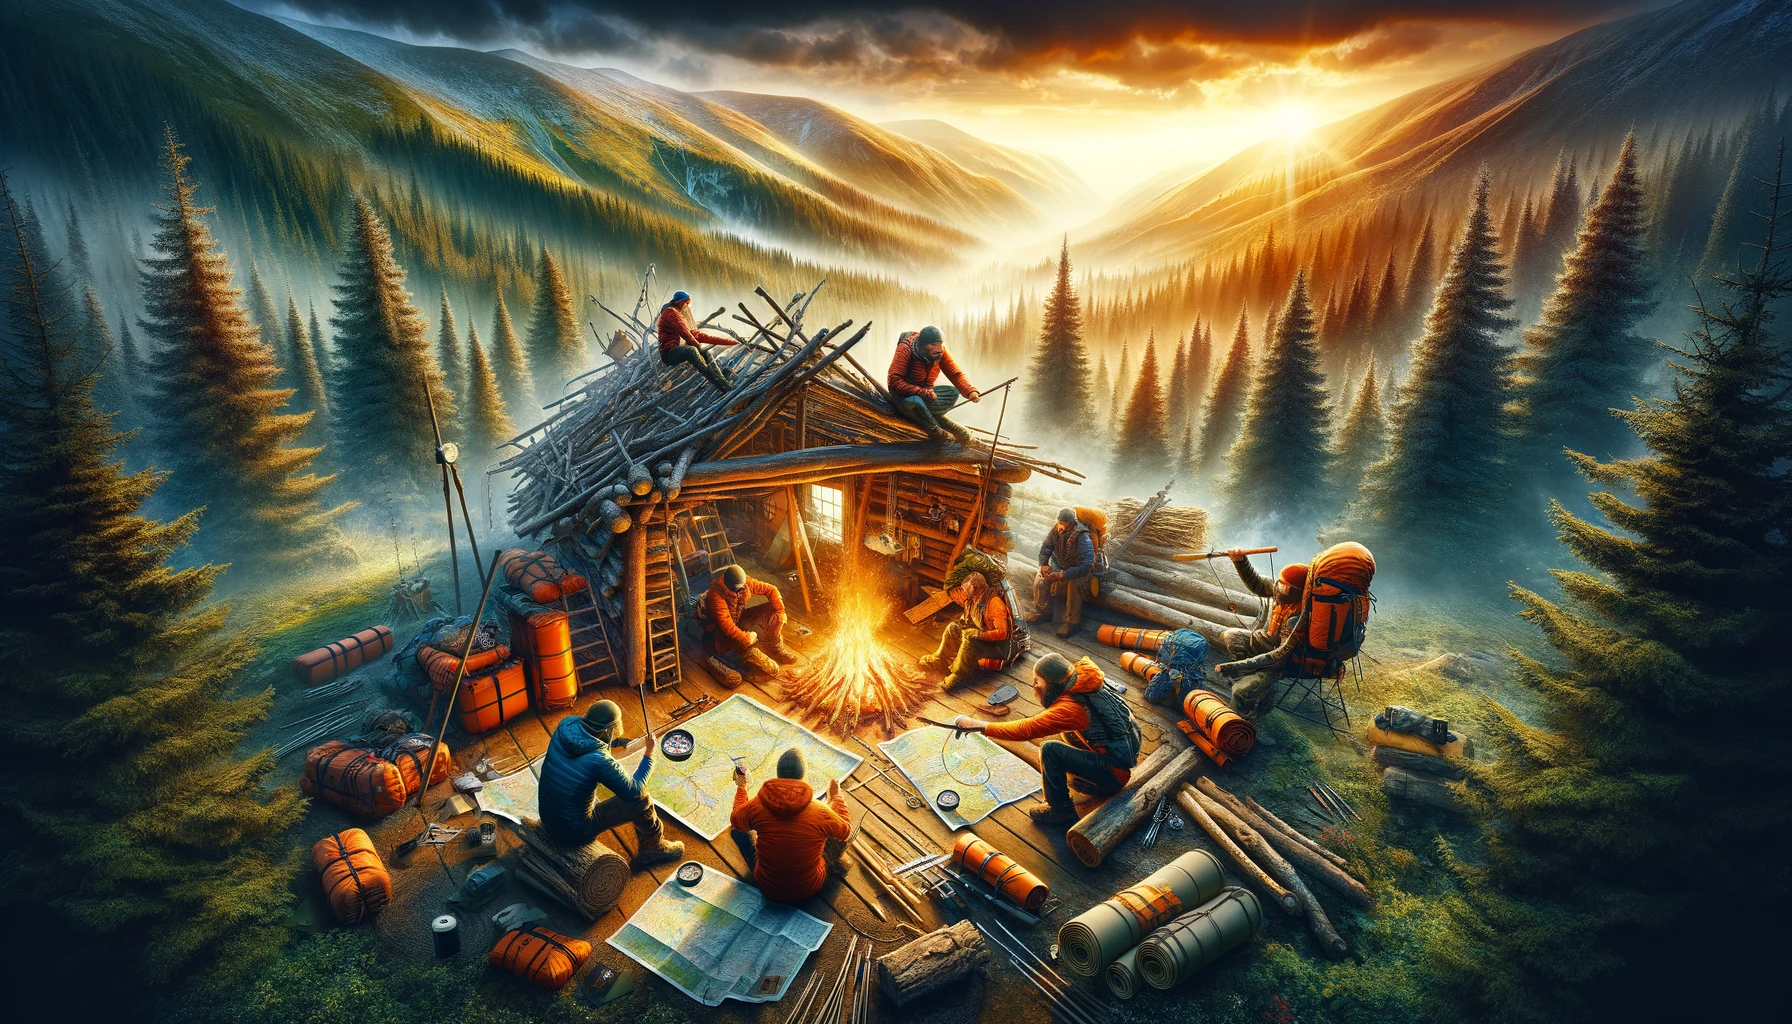 Individuals mastering navigation and shelter building in the wilderness, using compasses, maps, and GPS devices, and constructing shelters, in a dynamic scene that captures the essence of self-reliance and adaptability.